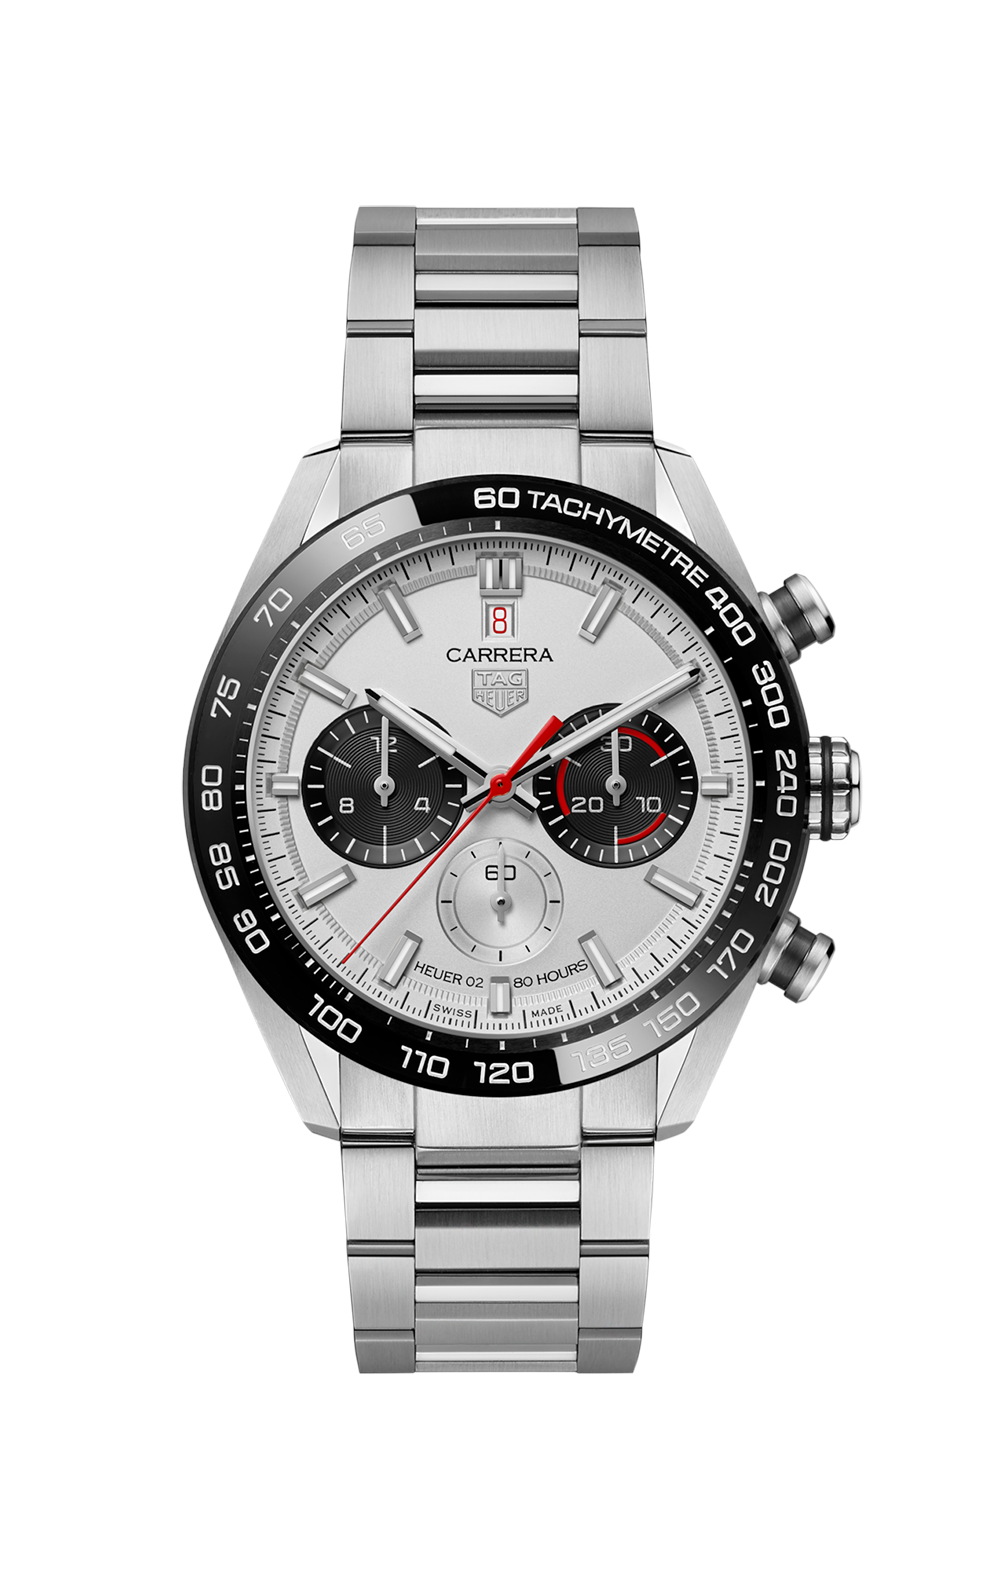 Carrera Limited Edition 160 Heuer 02 Automatic Chronograph